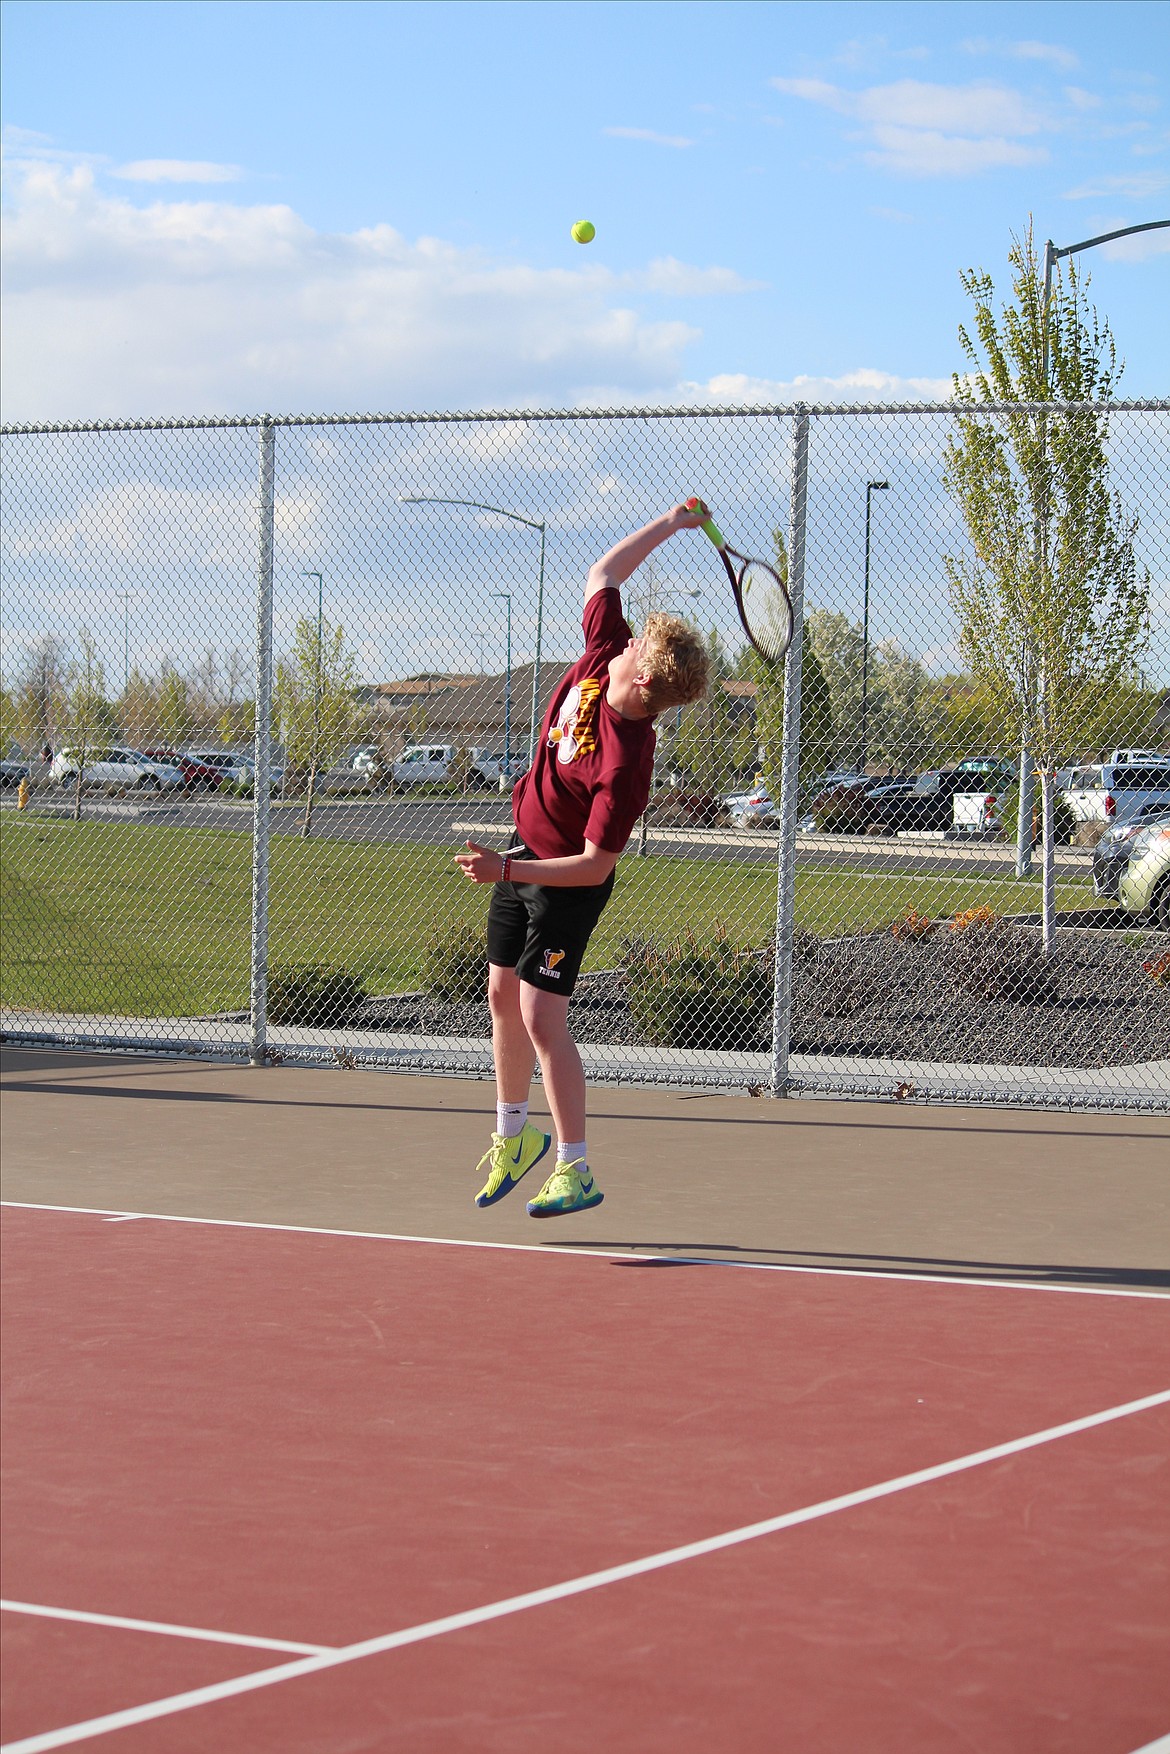 Colin Stanberry goes up for the serve.